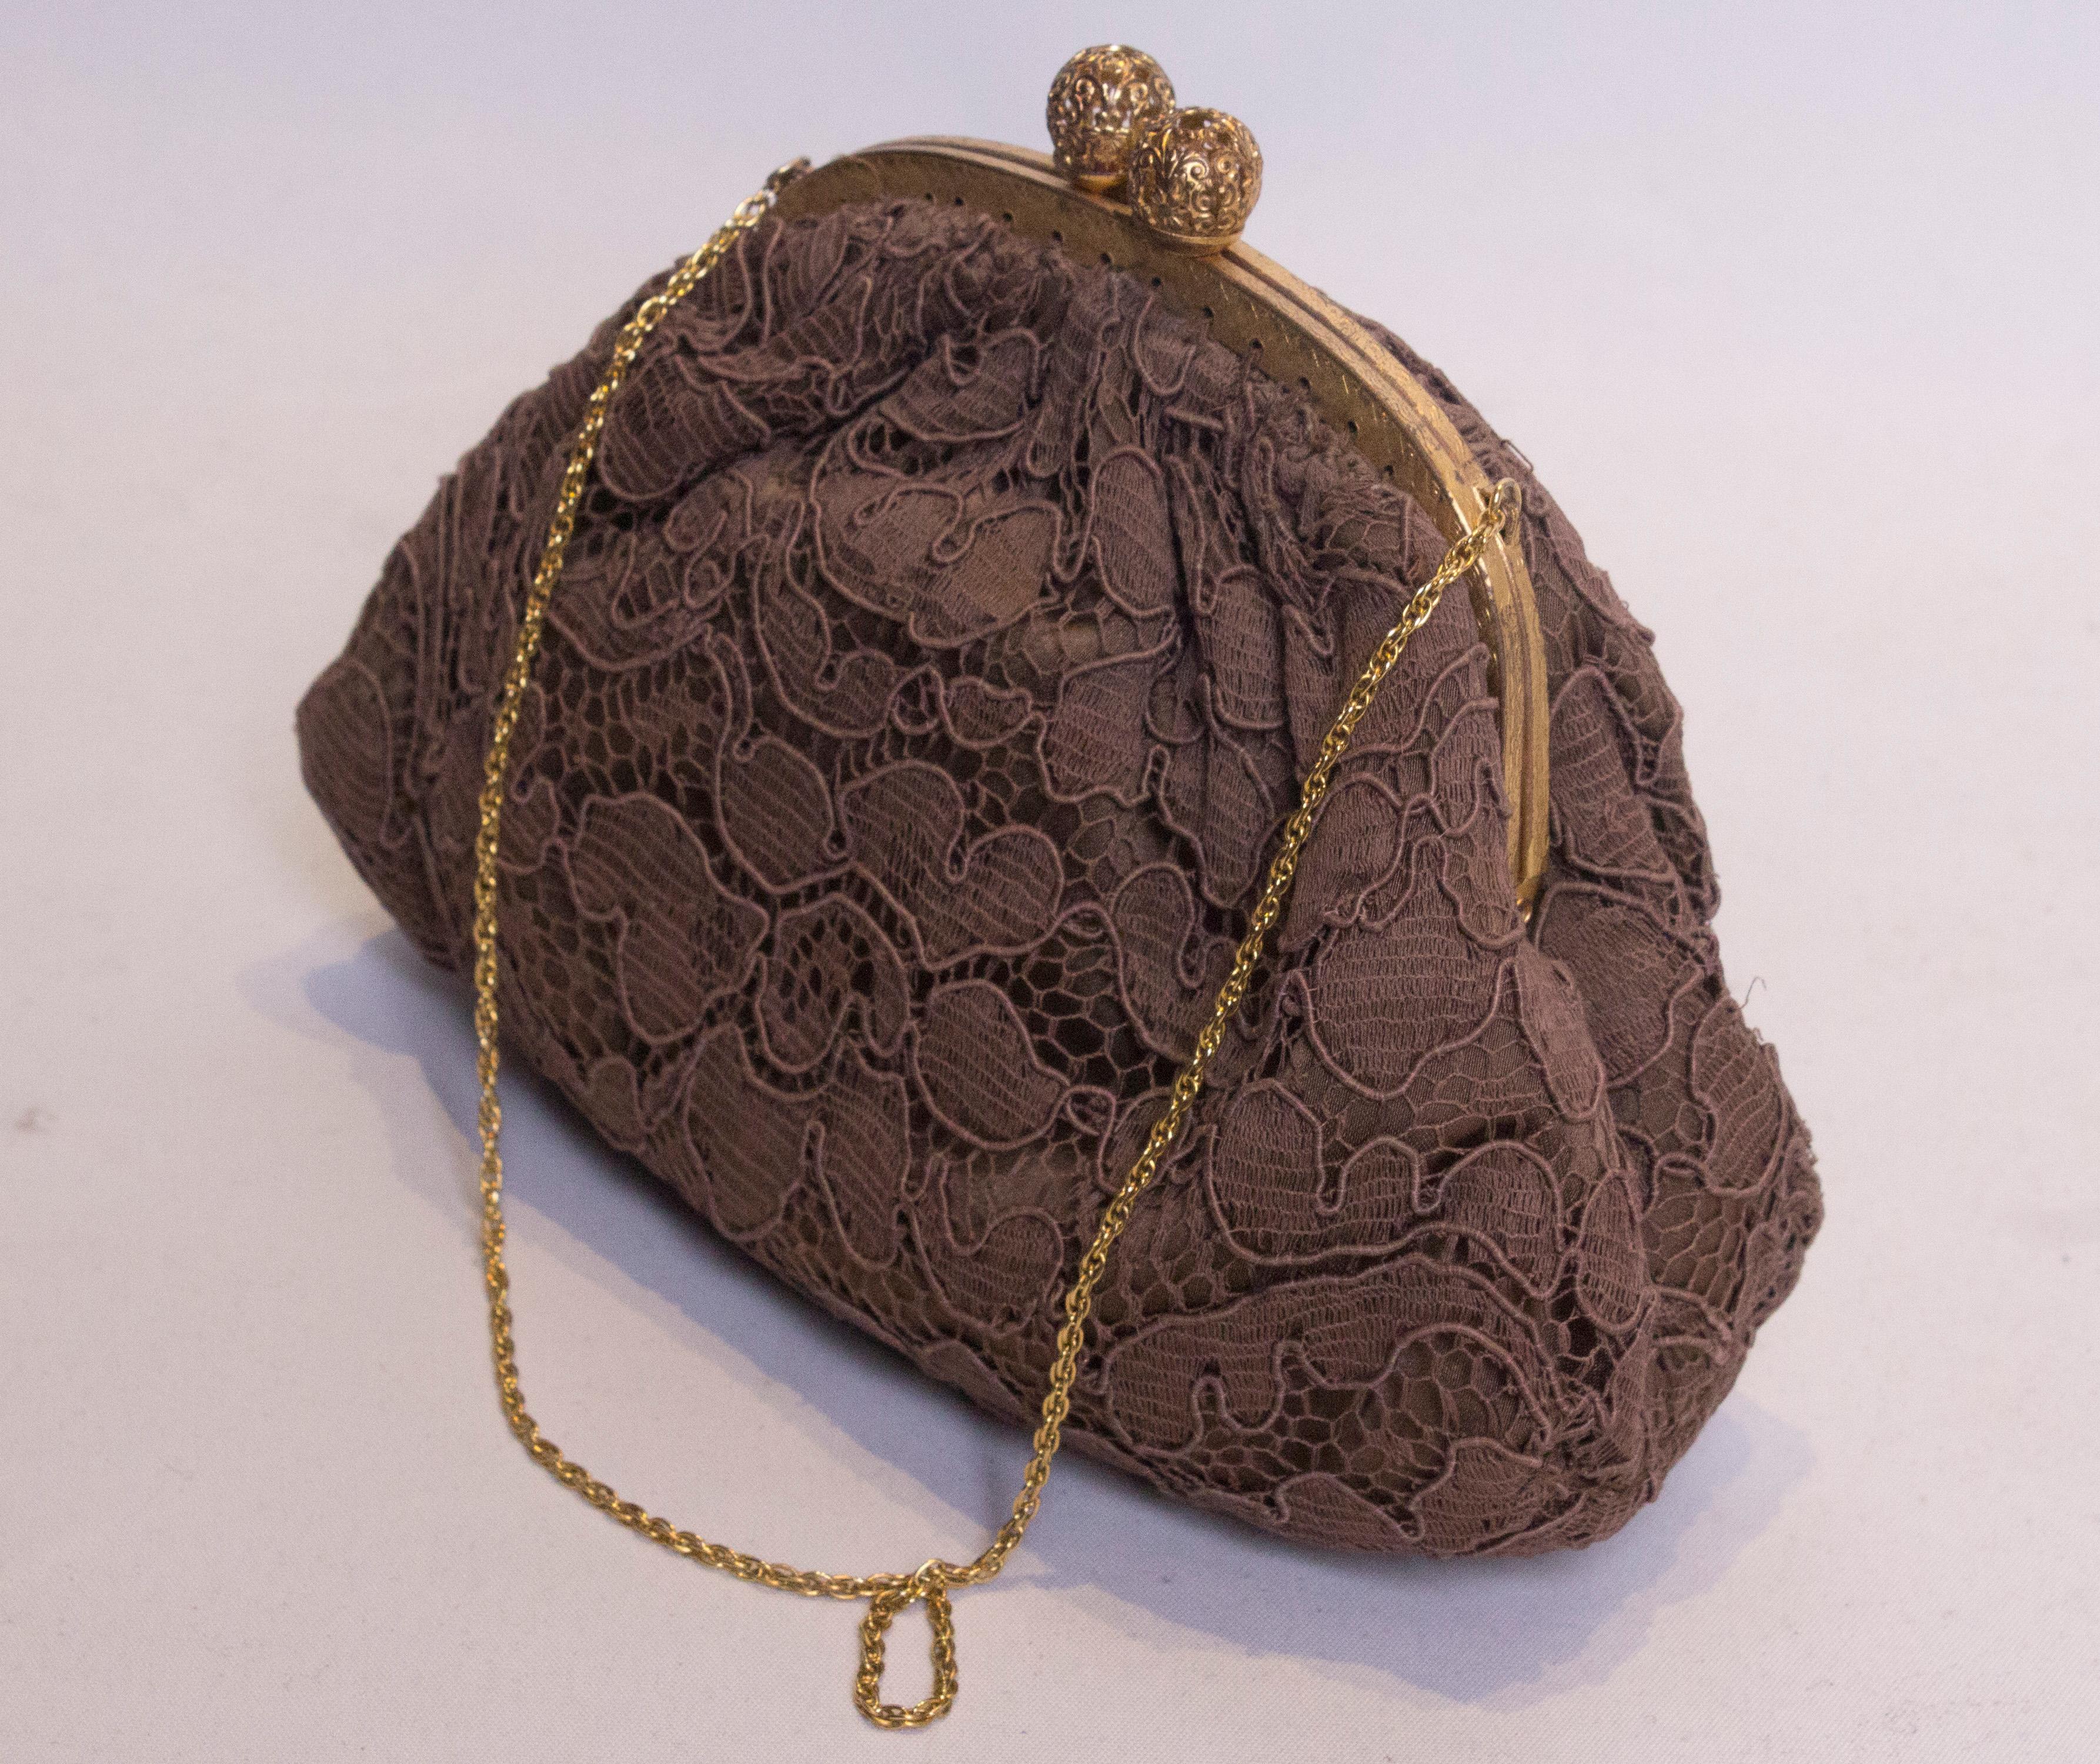 A pretty bag for an autumn evening. In brown lace this bag  has a two ball central clasp with a chain handle.  The bag is fully lined. 